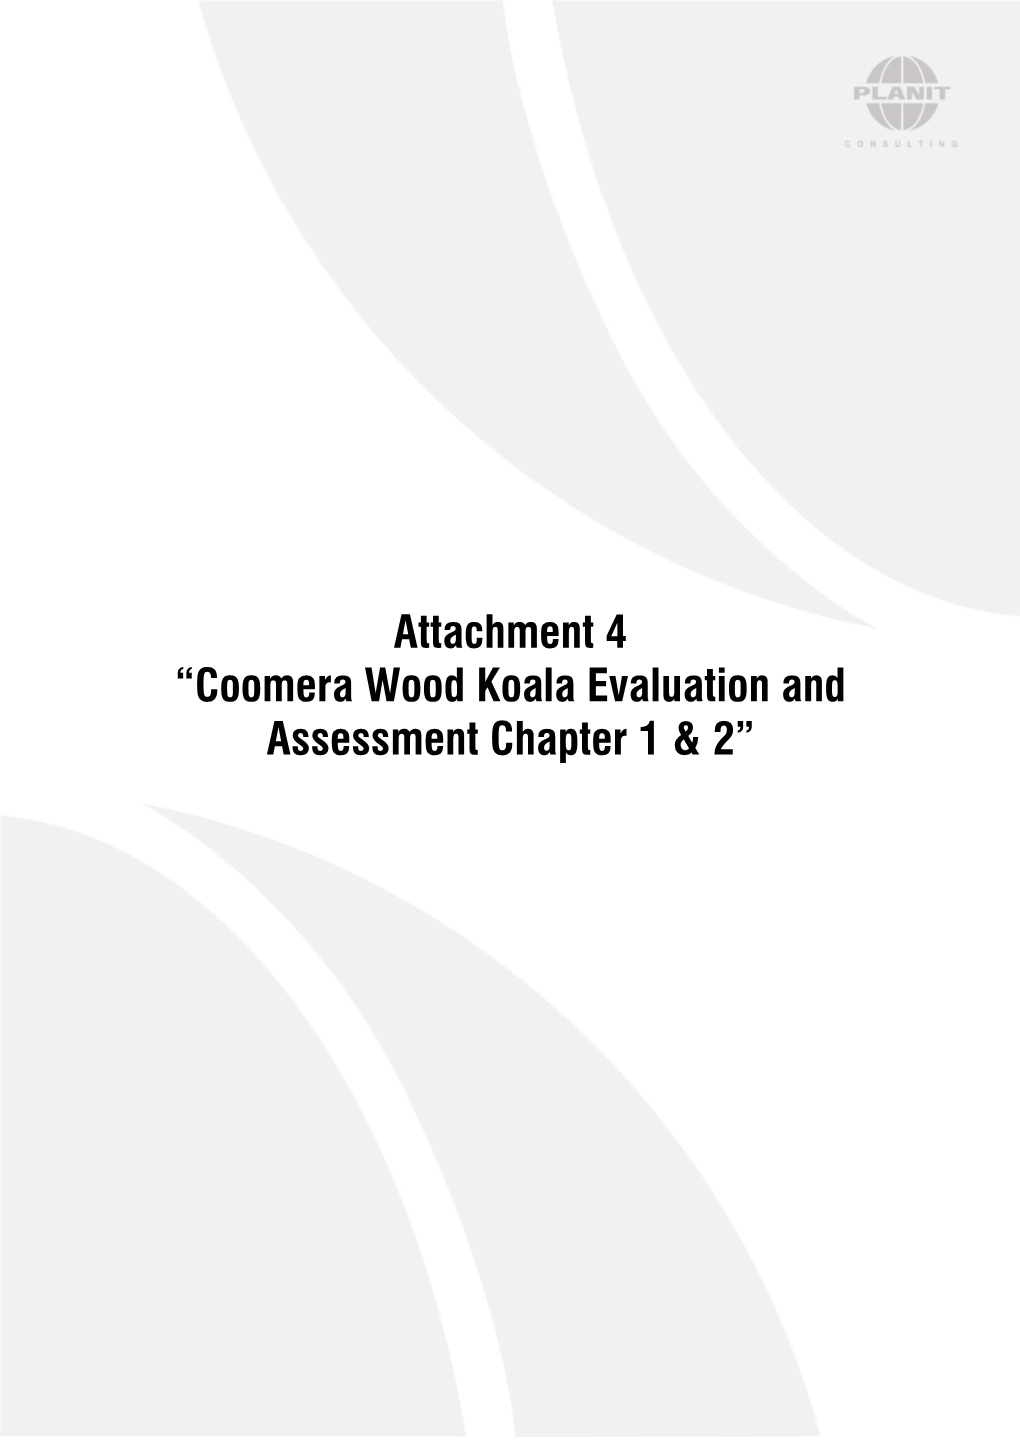 Coomera Wood Koala Evaluation and Assessment Chapter 1 & 2